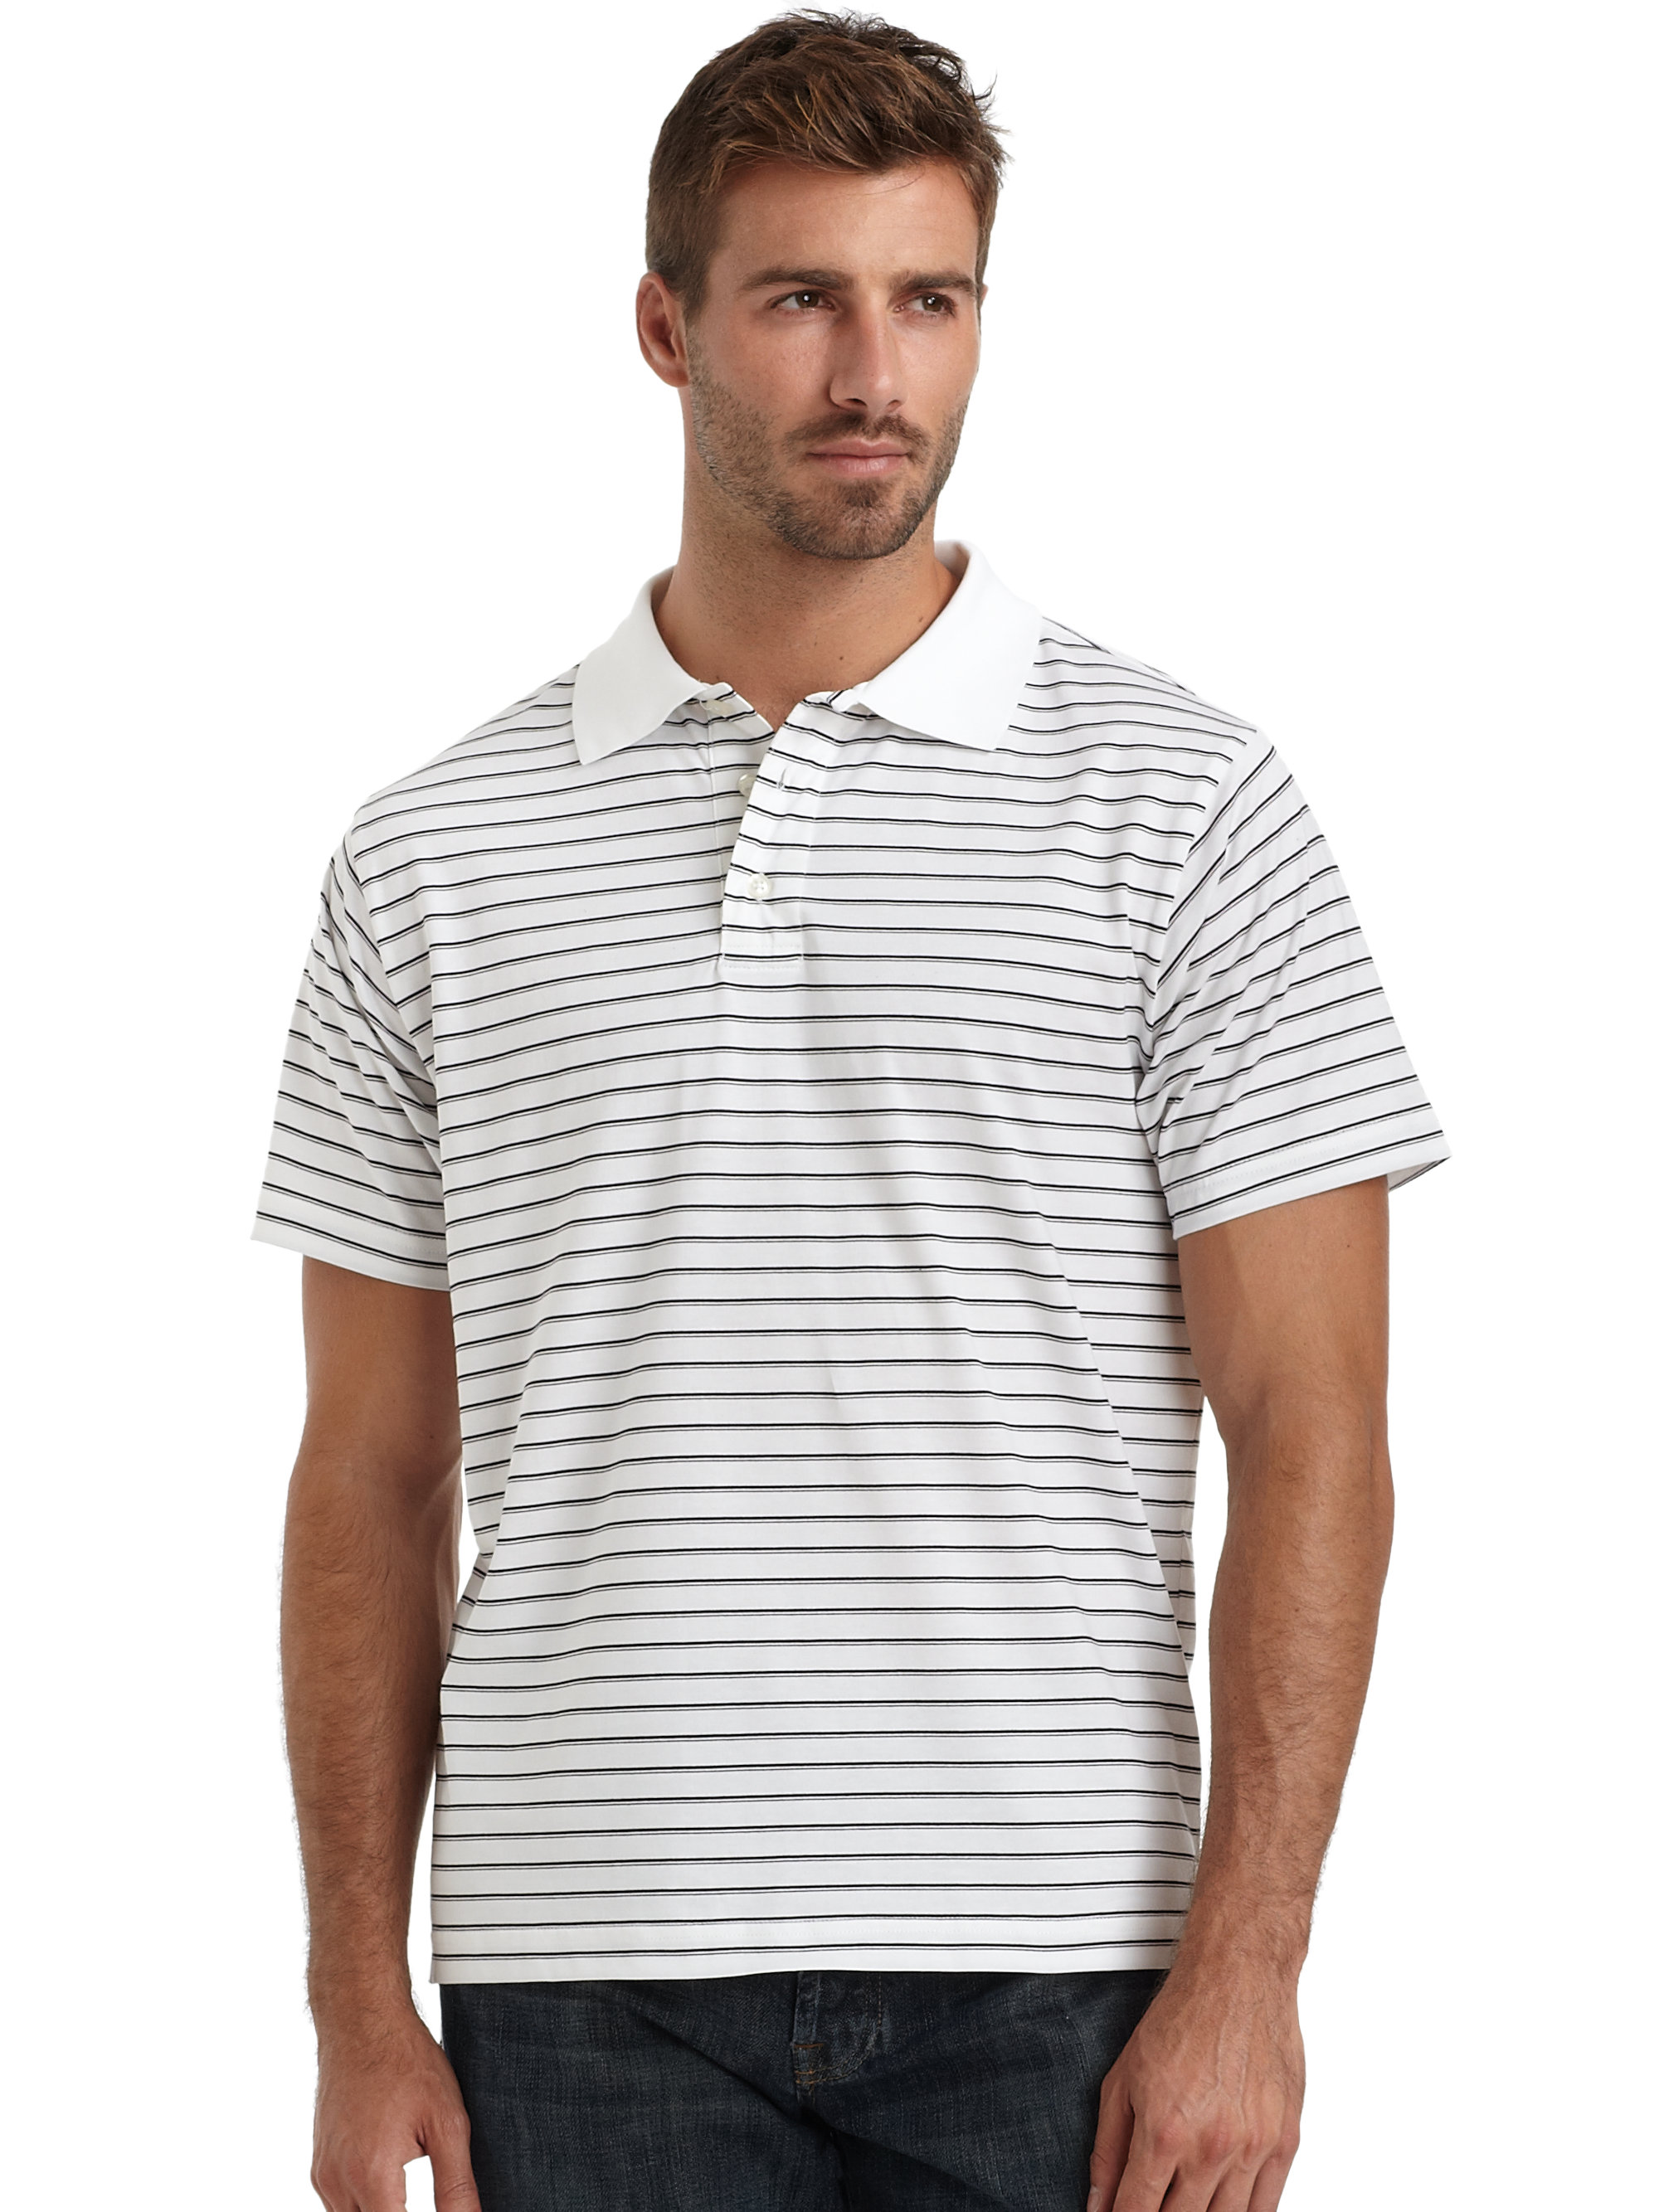 Saks fifth avenue black label Striped Ice Cotton Polo Shirt in White ...